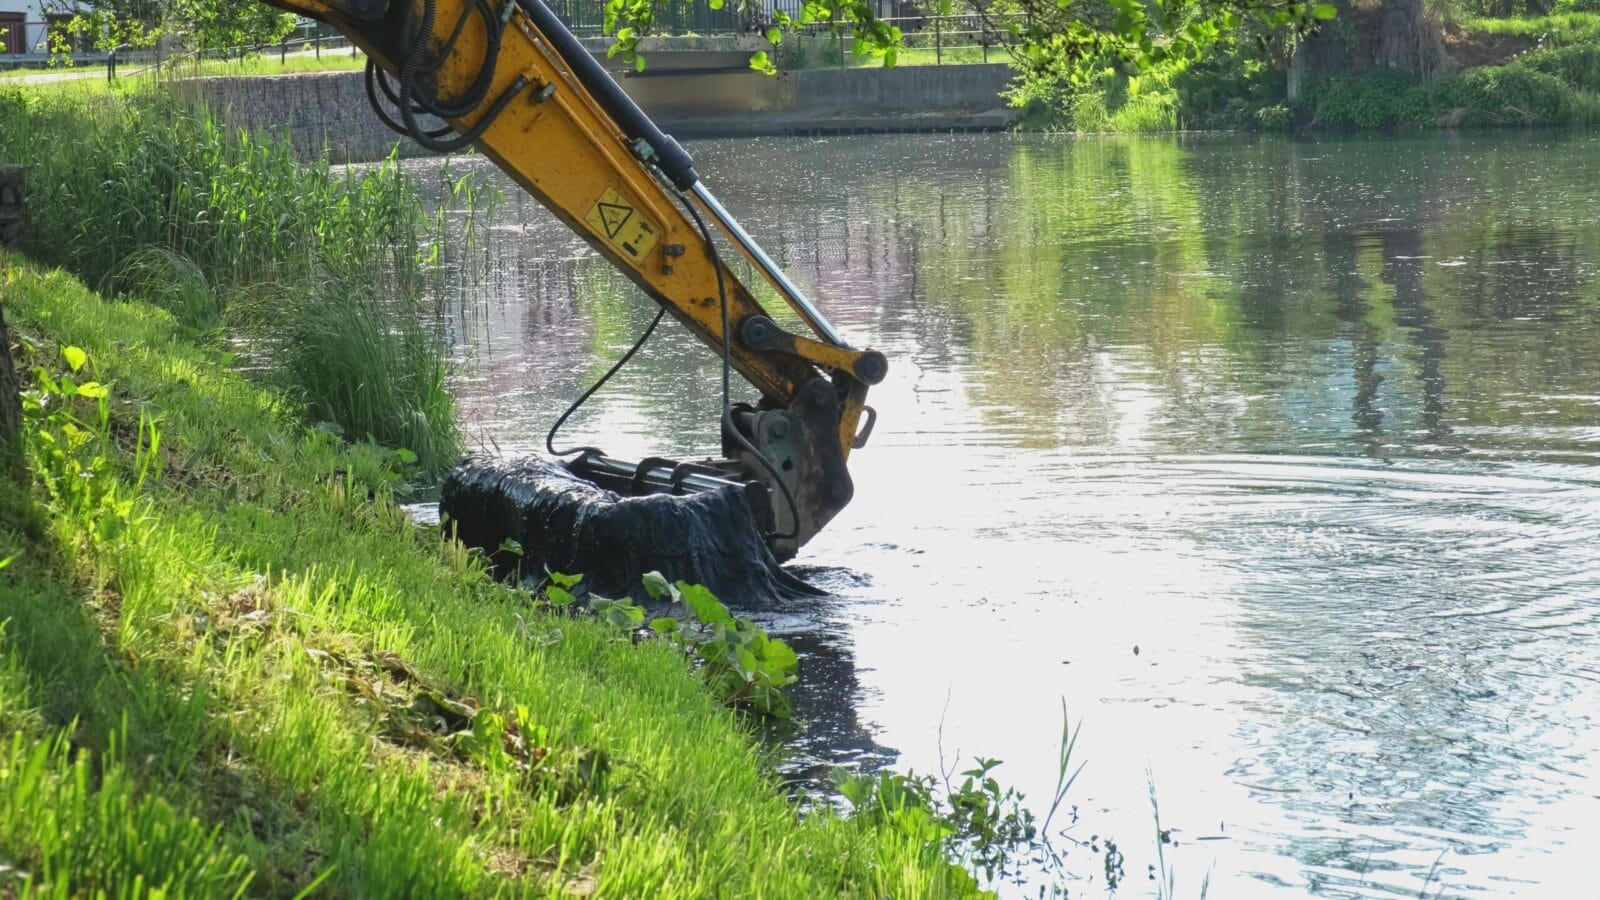 Dredging a pond with an excavator